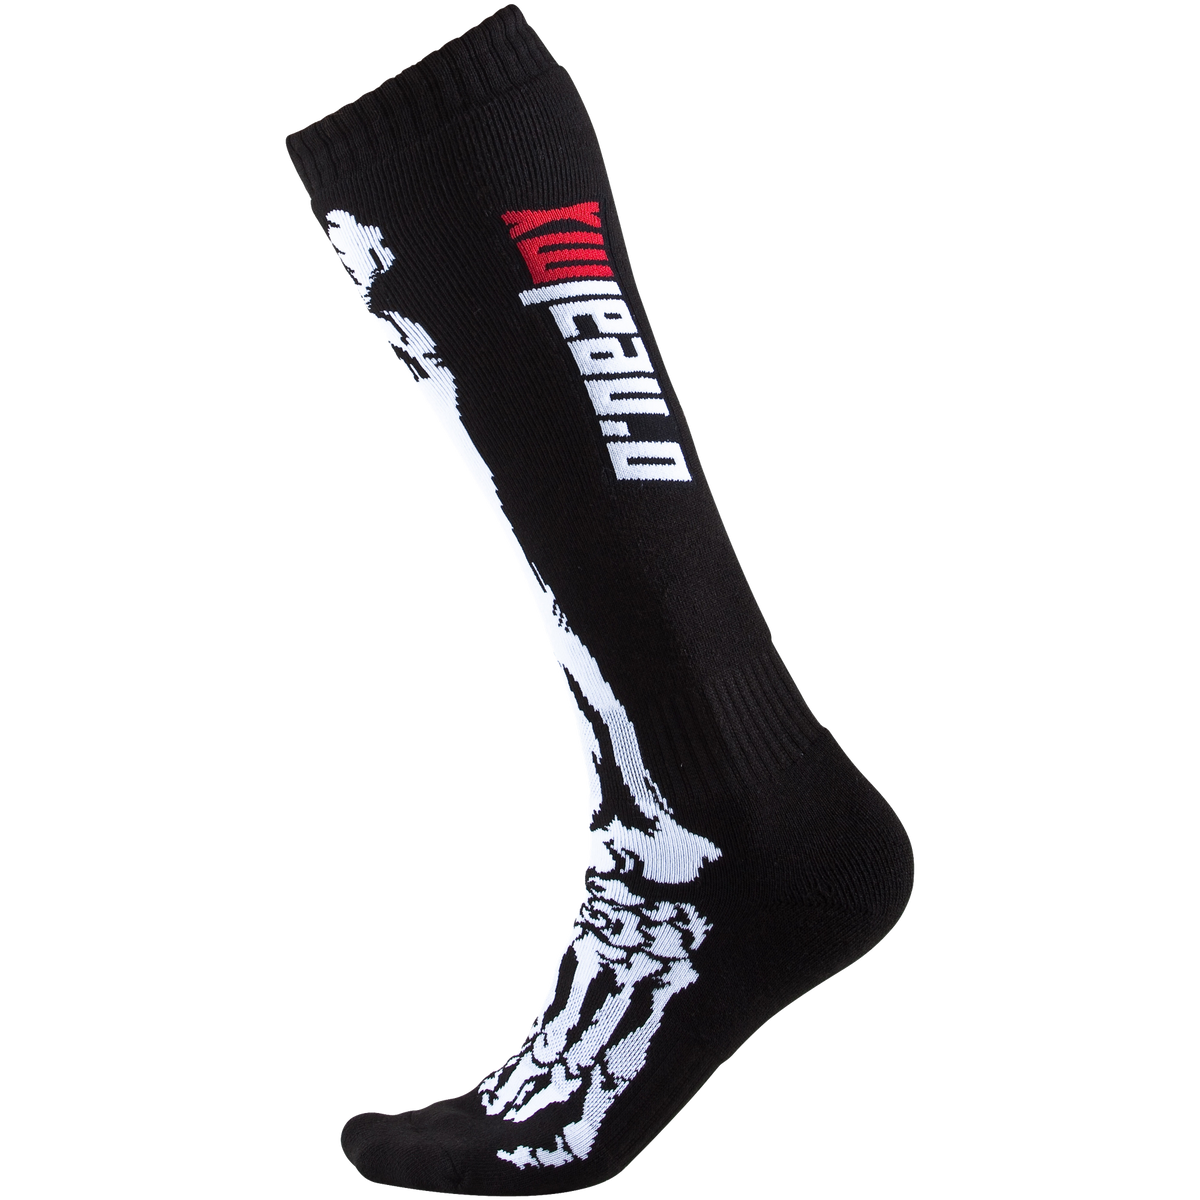 https://cdn.oneal.eu/assets/importedProductImages/ACCESSORIES/PRO%20MX%20SOCKS/XRAY/2016_ONeal_MXSock_XRay.png